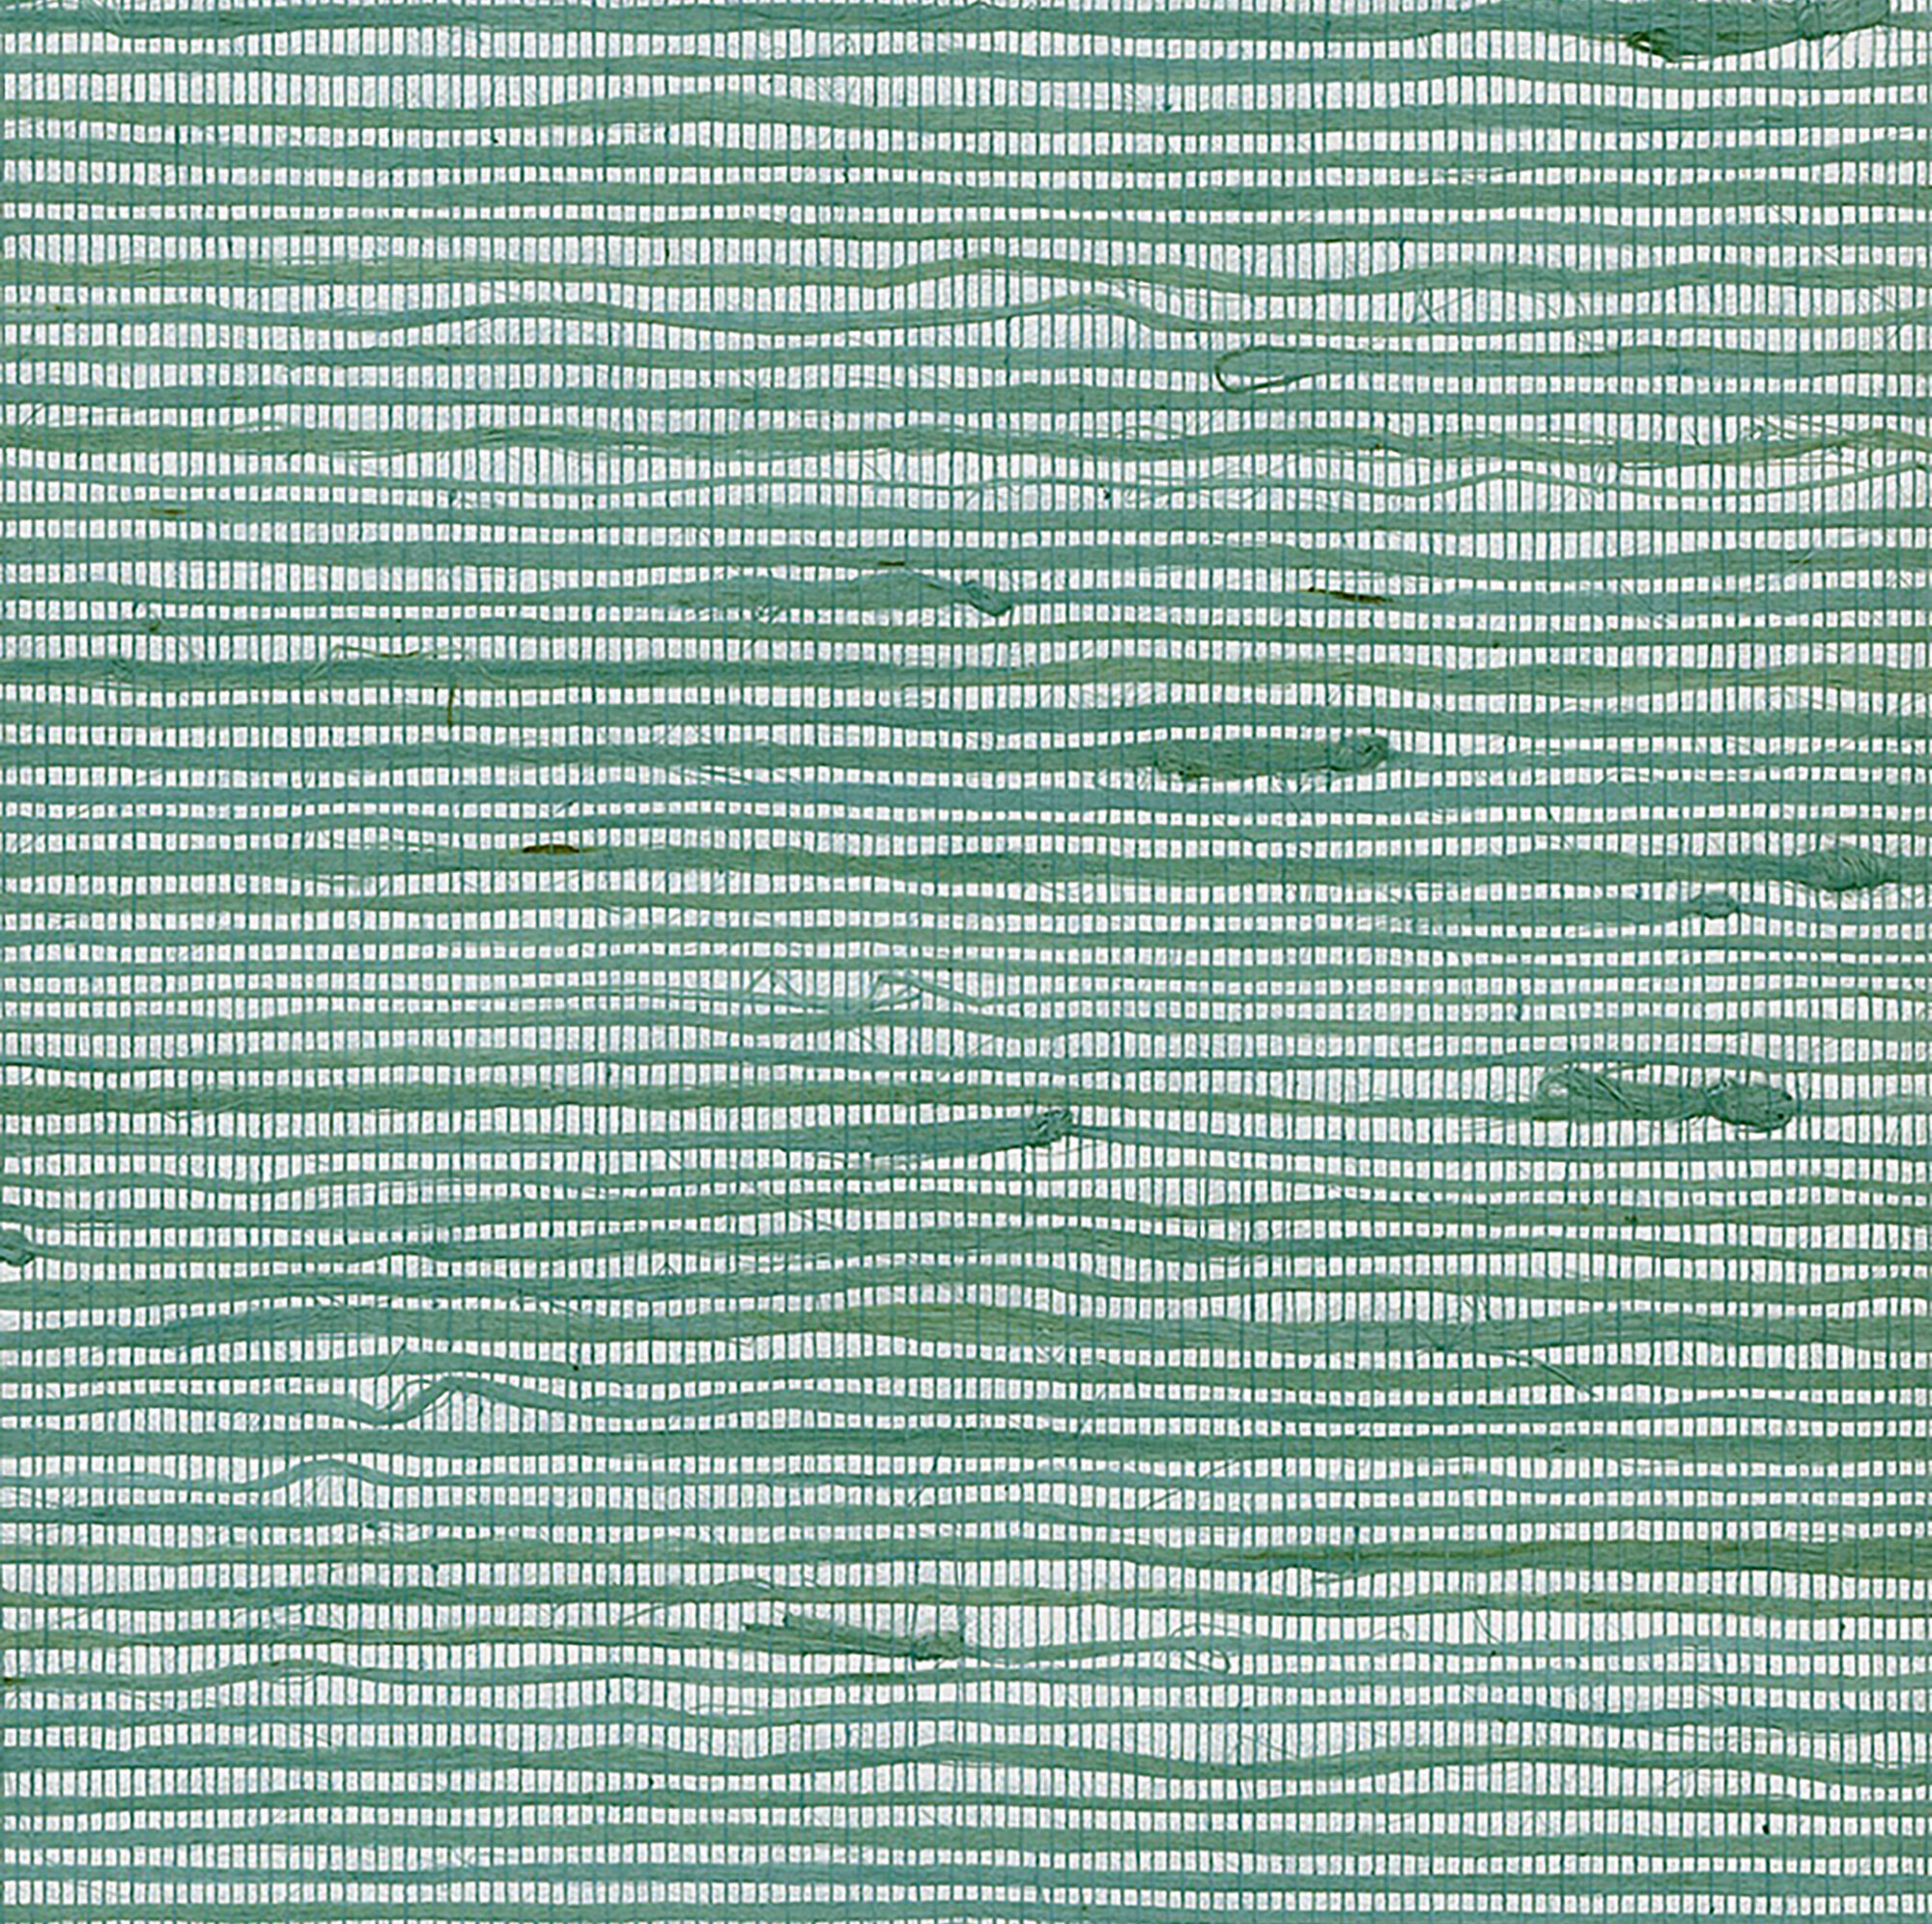 Embossed L on Green